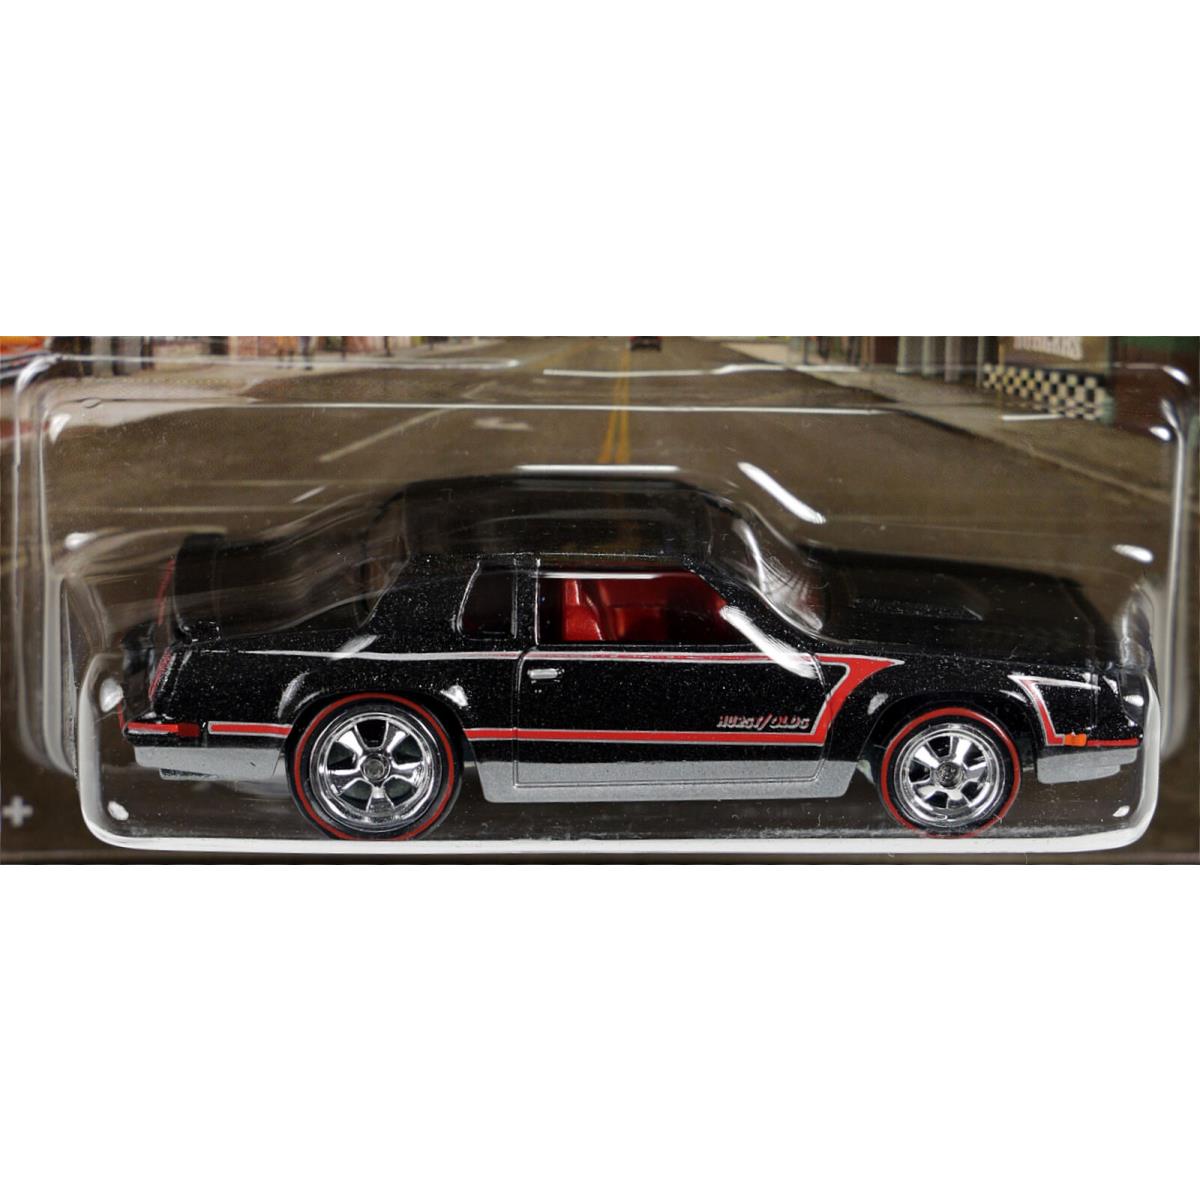 Hot Wheels `84 Hurst Olds Boulevard Series X8297 Never Removed From Pack 2012